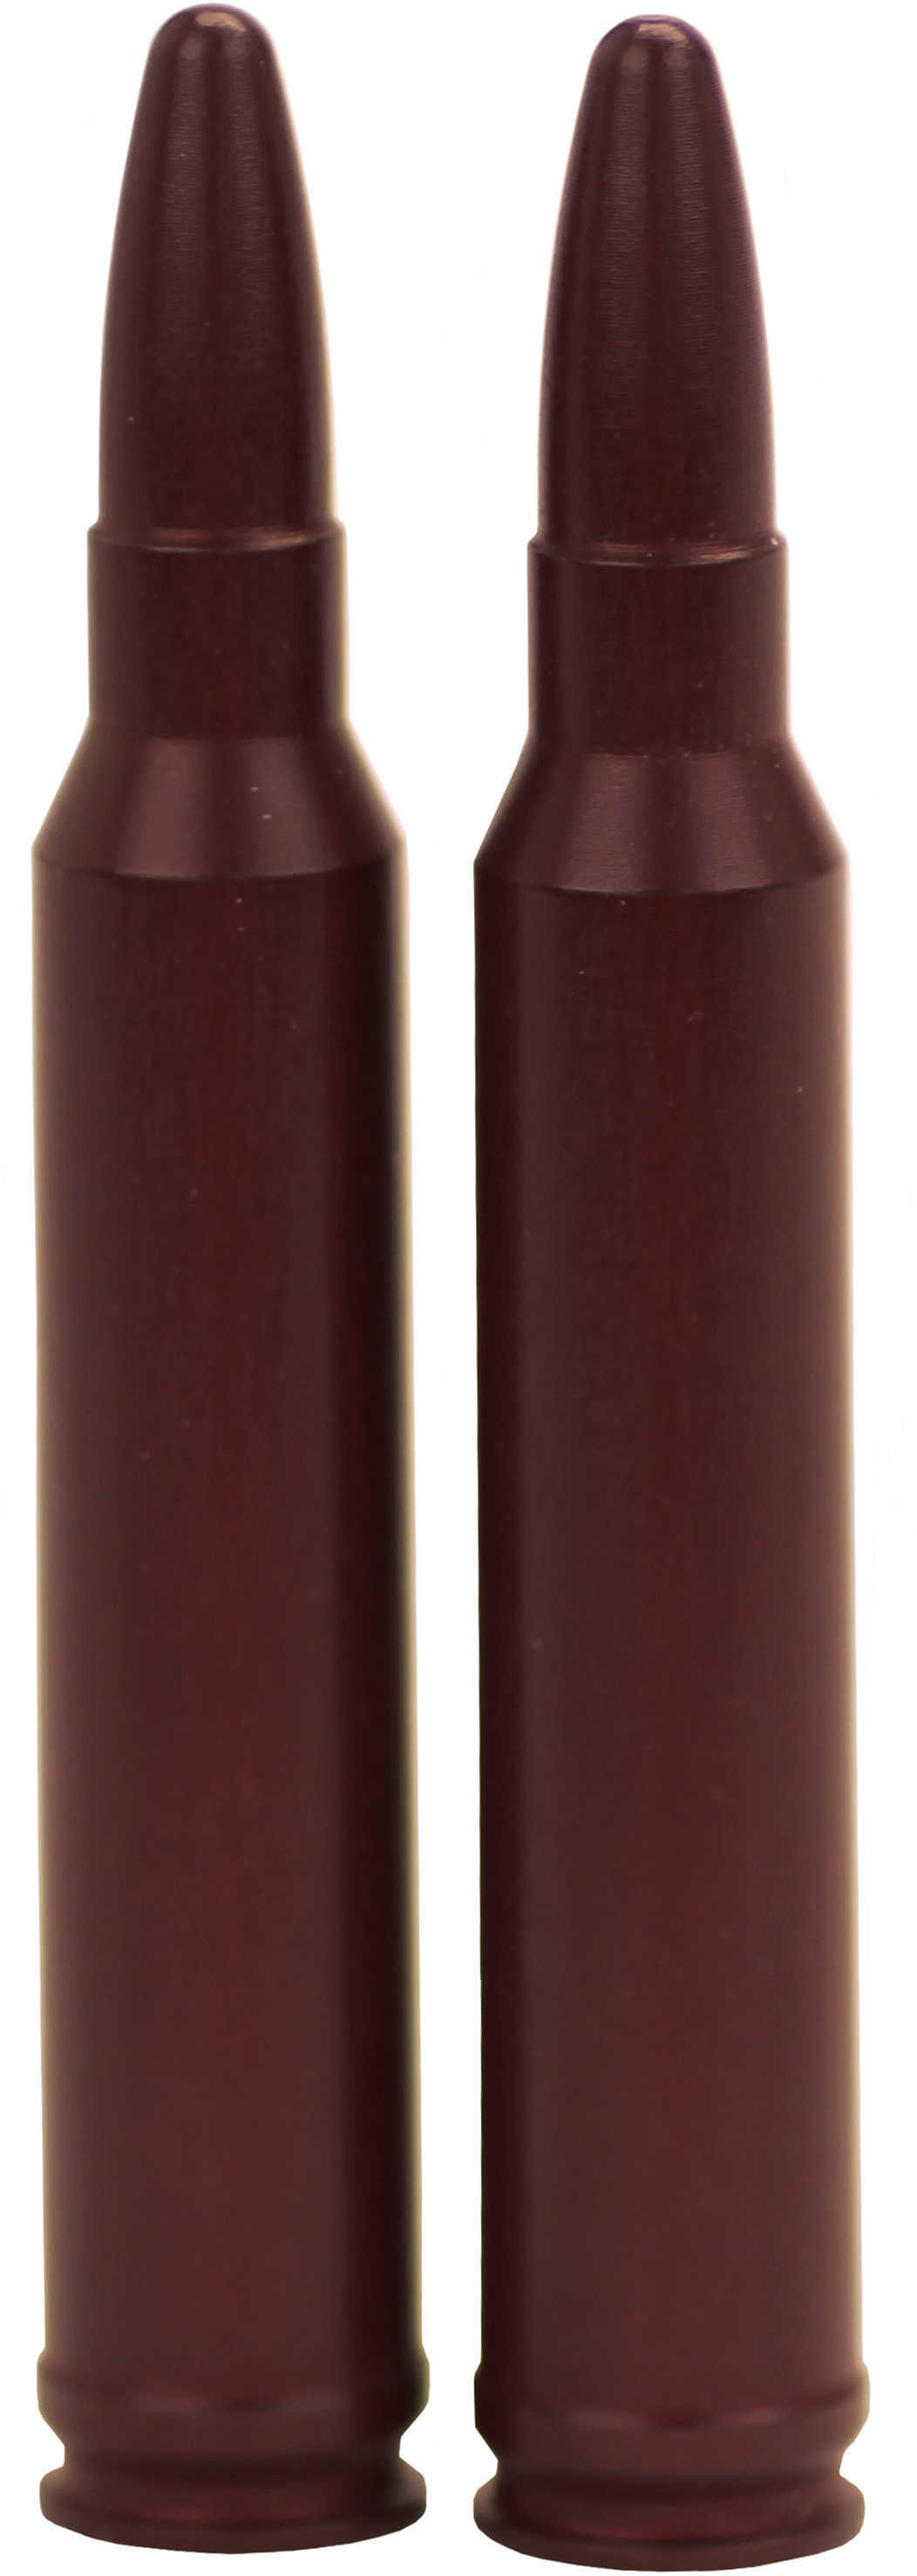 A-Zoom Pachmayr Rifle Metal Snap Caps 300 Win Mag, (Per 2) 12237